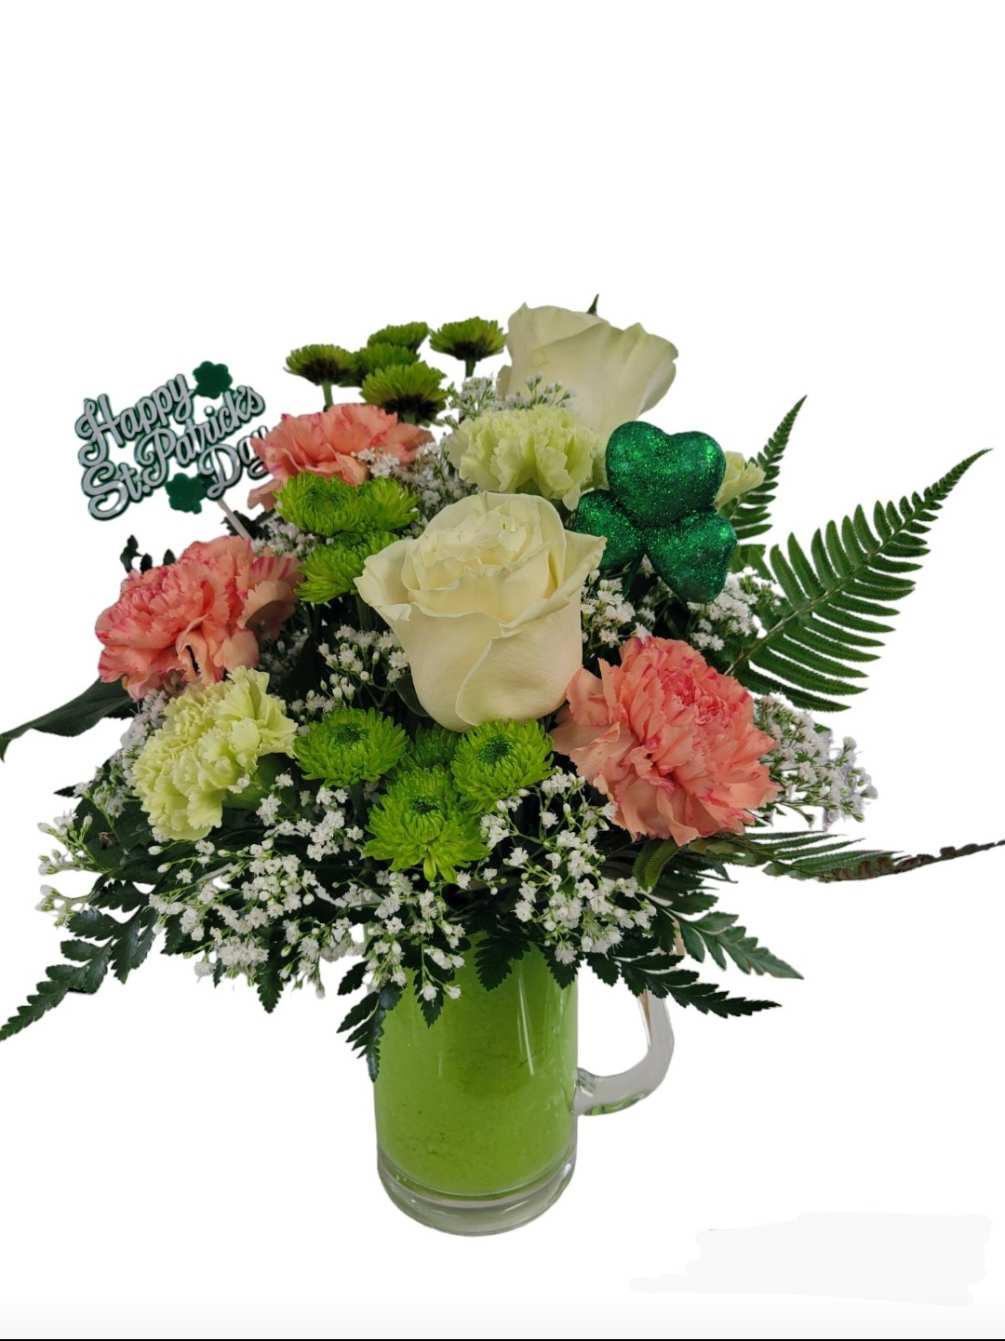 A beer mug filled with fun flowers - green carnations, white roses